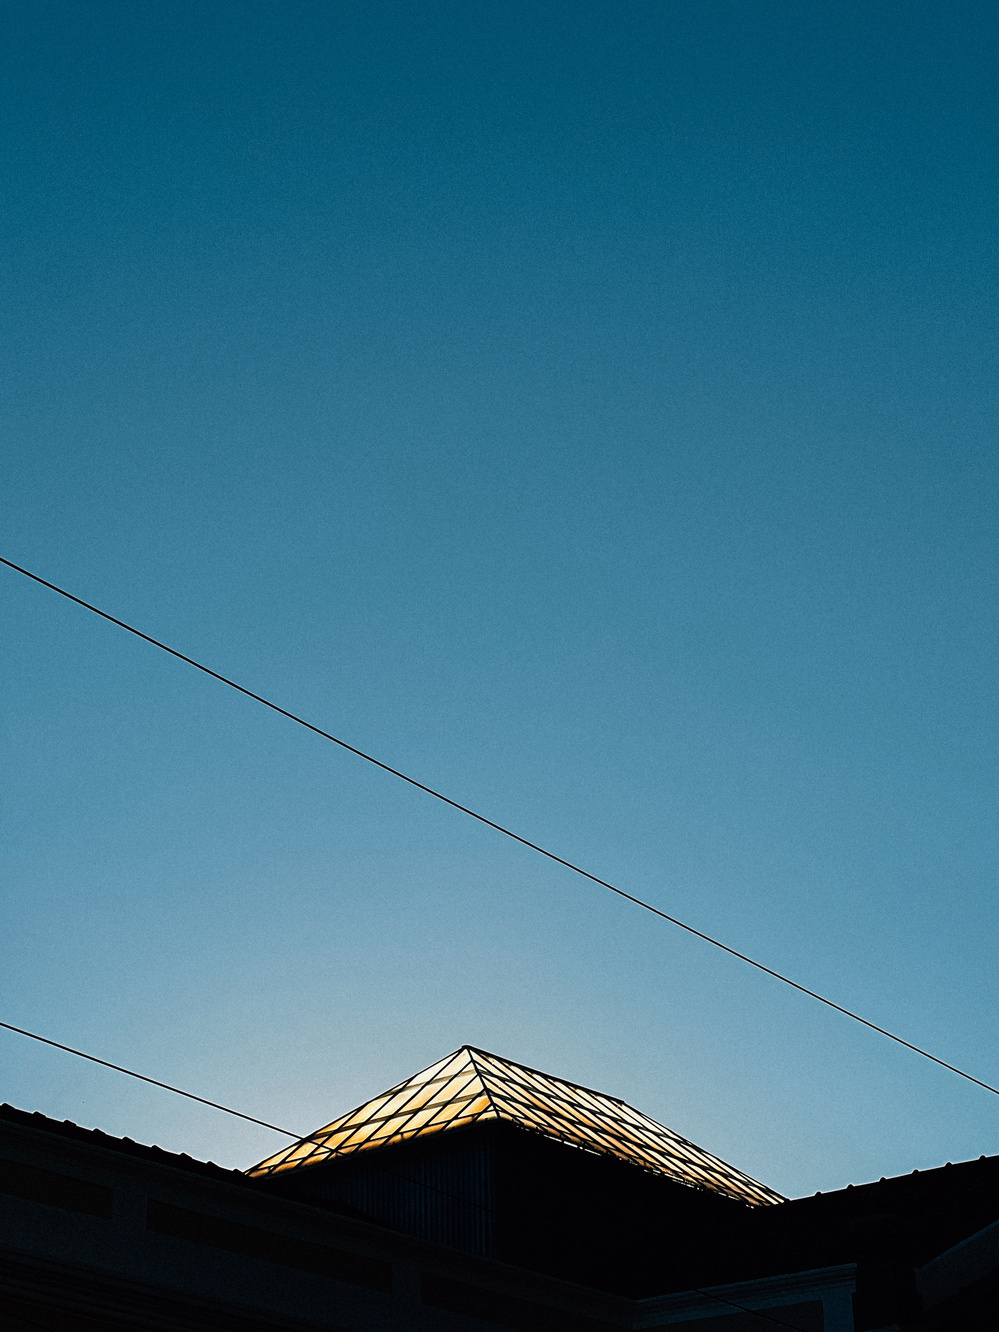 The image features the silhouette of a building with a glass skylight on its roof against a clear blue sky. Two overhead wires extend diagonally across the sky.